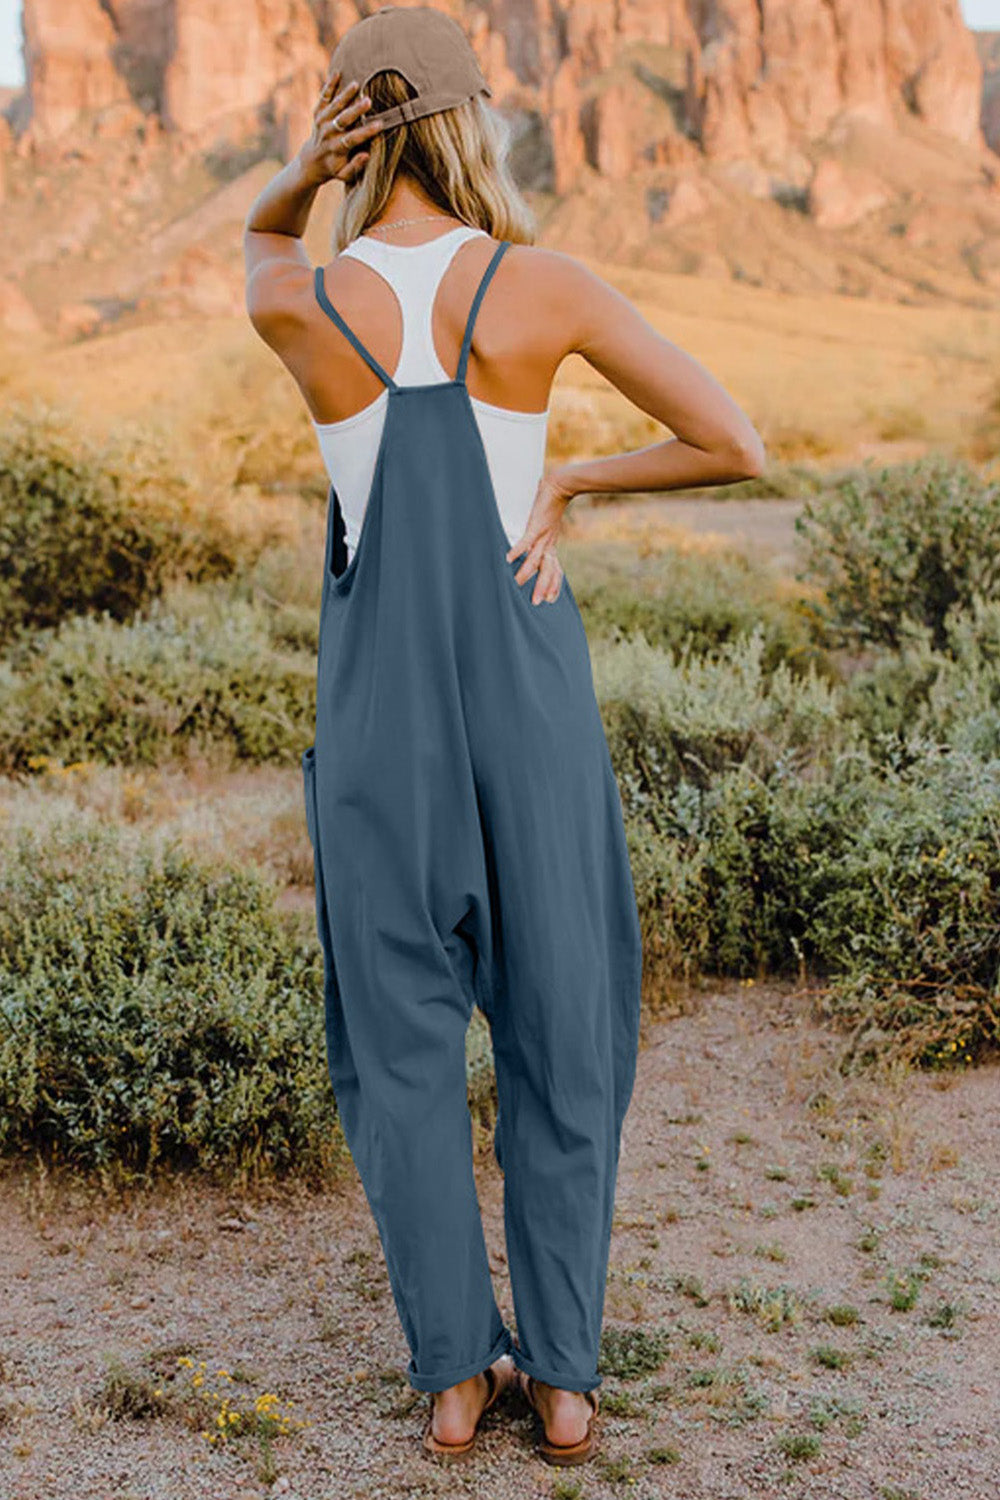 Double Take  V-Neck Sleeveless Jumpsuit with Pocket  Southern Soul Collectives 